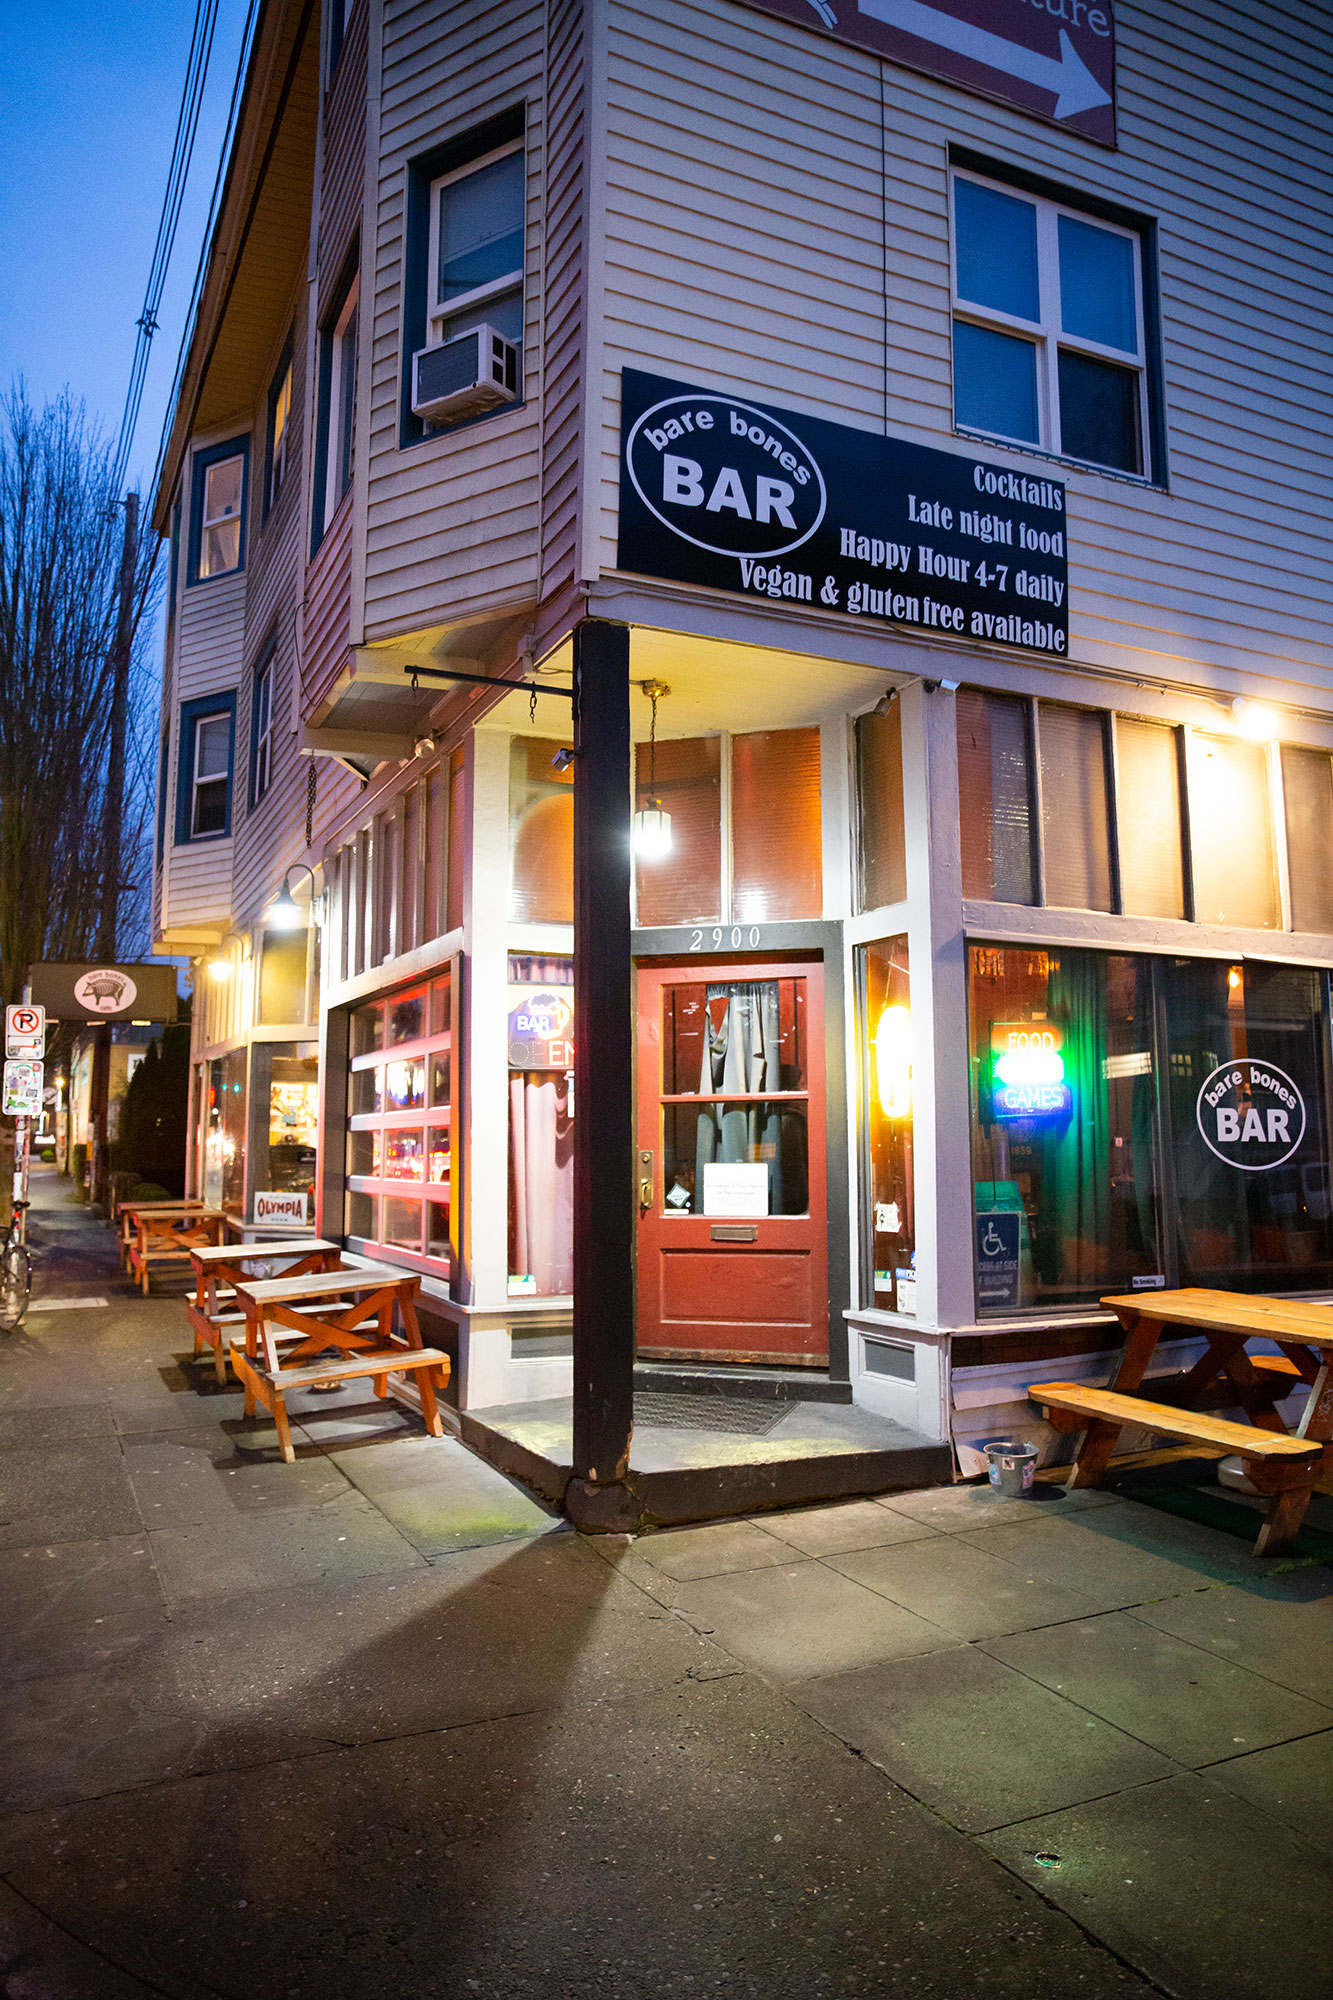 Bare Bones Cafe & Bar Open for Dine In, Delivery & Take Out in SE Portland   Slushies, Growler Fills, Espresso Drinks, Salads, Soups, Sandwiches - PDX  Pipeline